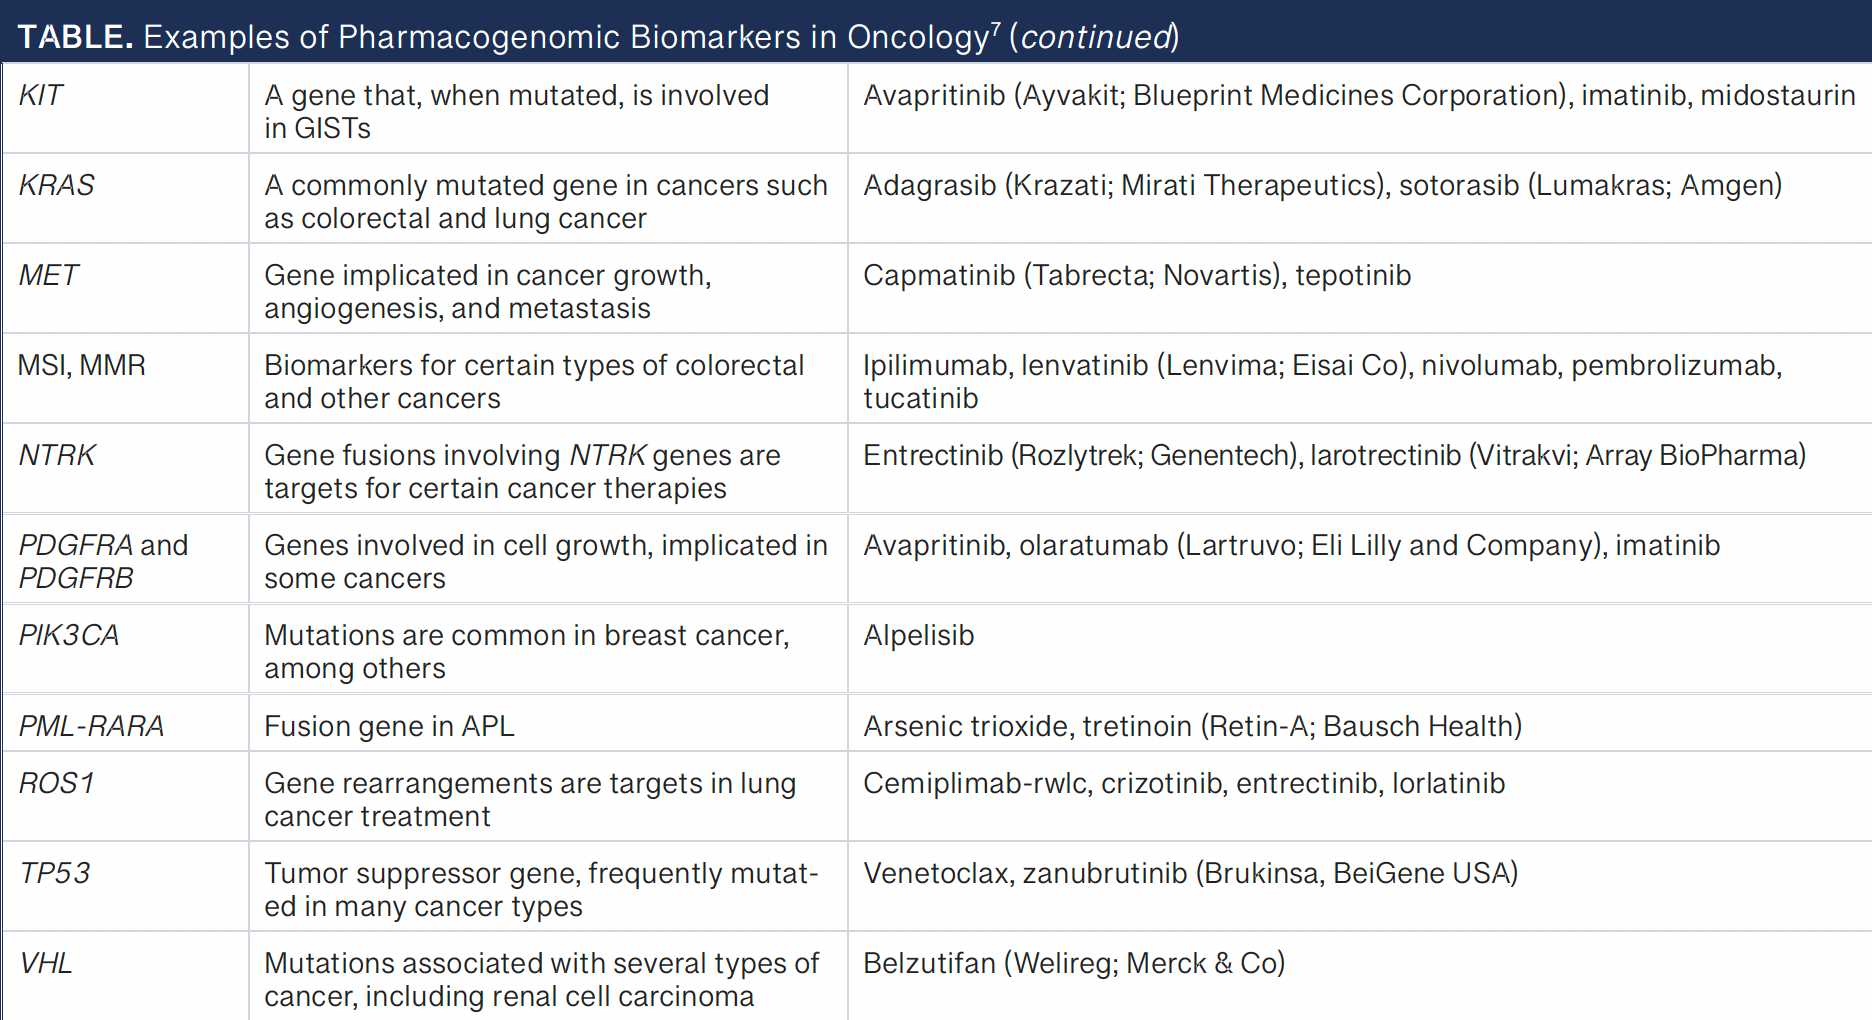 Table (cont.): Examples of Pharmacogenomic Biomarkers in Oncology -- APL, acute promyelocytic leukemia; GISTs, gastrointestinal stromal tumors; MMR, mismatch repair; MSI, microsatellite instability.